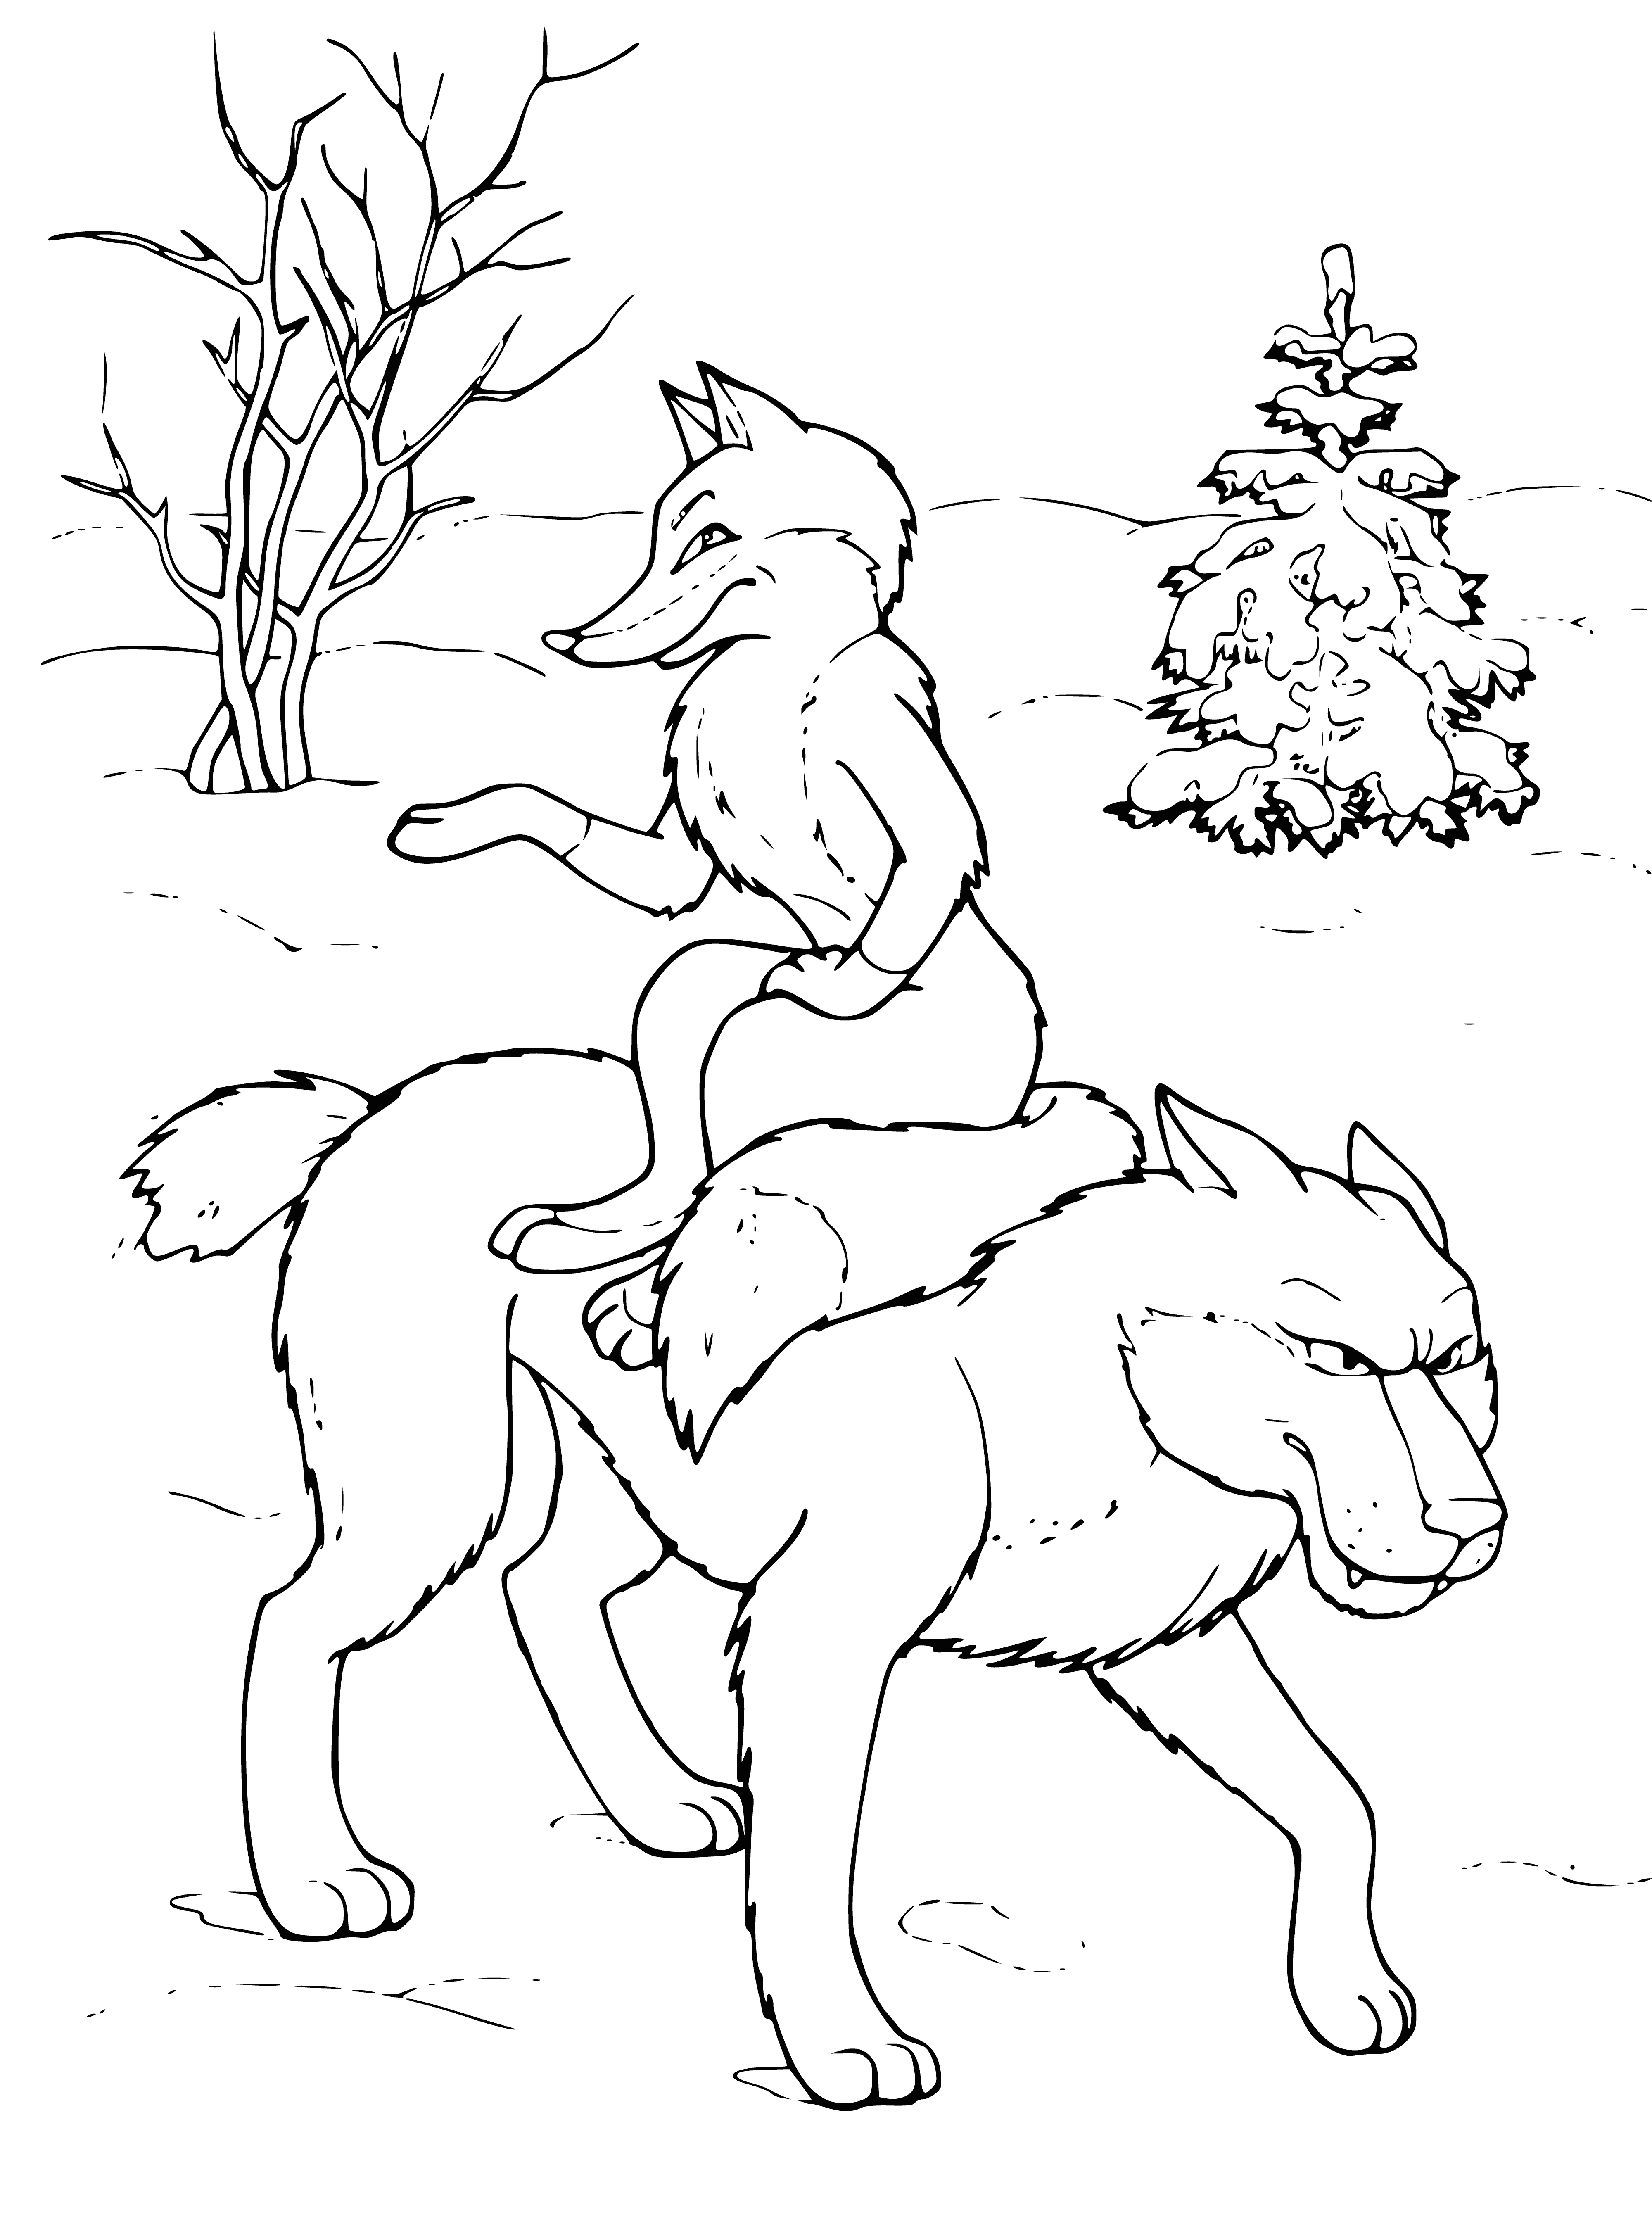 Lisa and the wolf coloring page